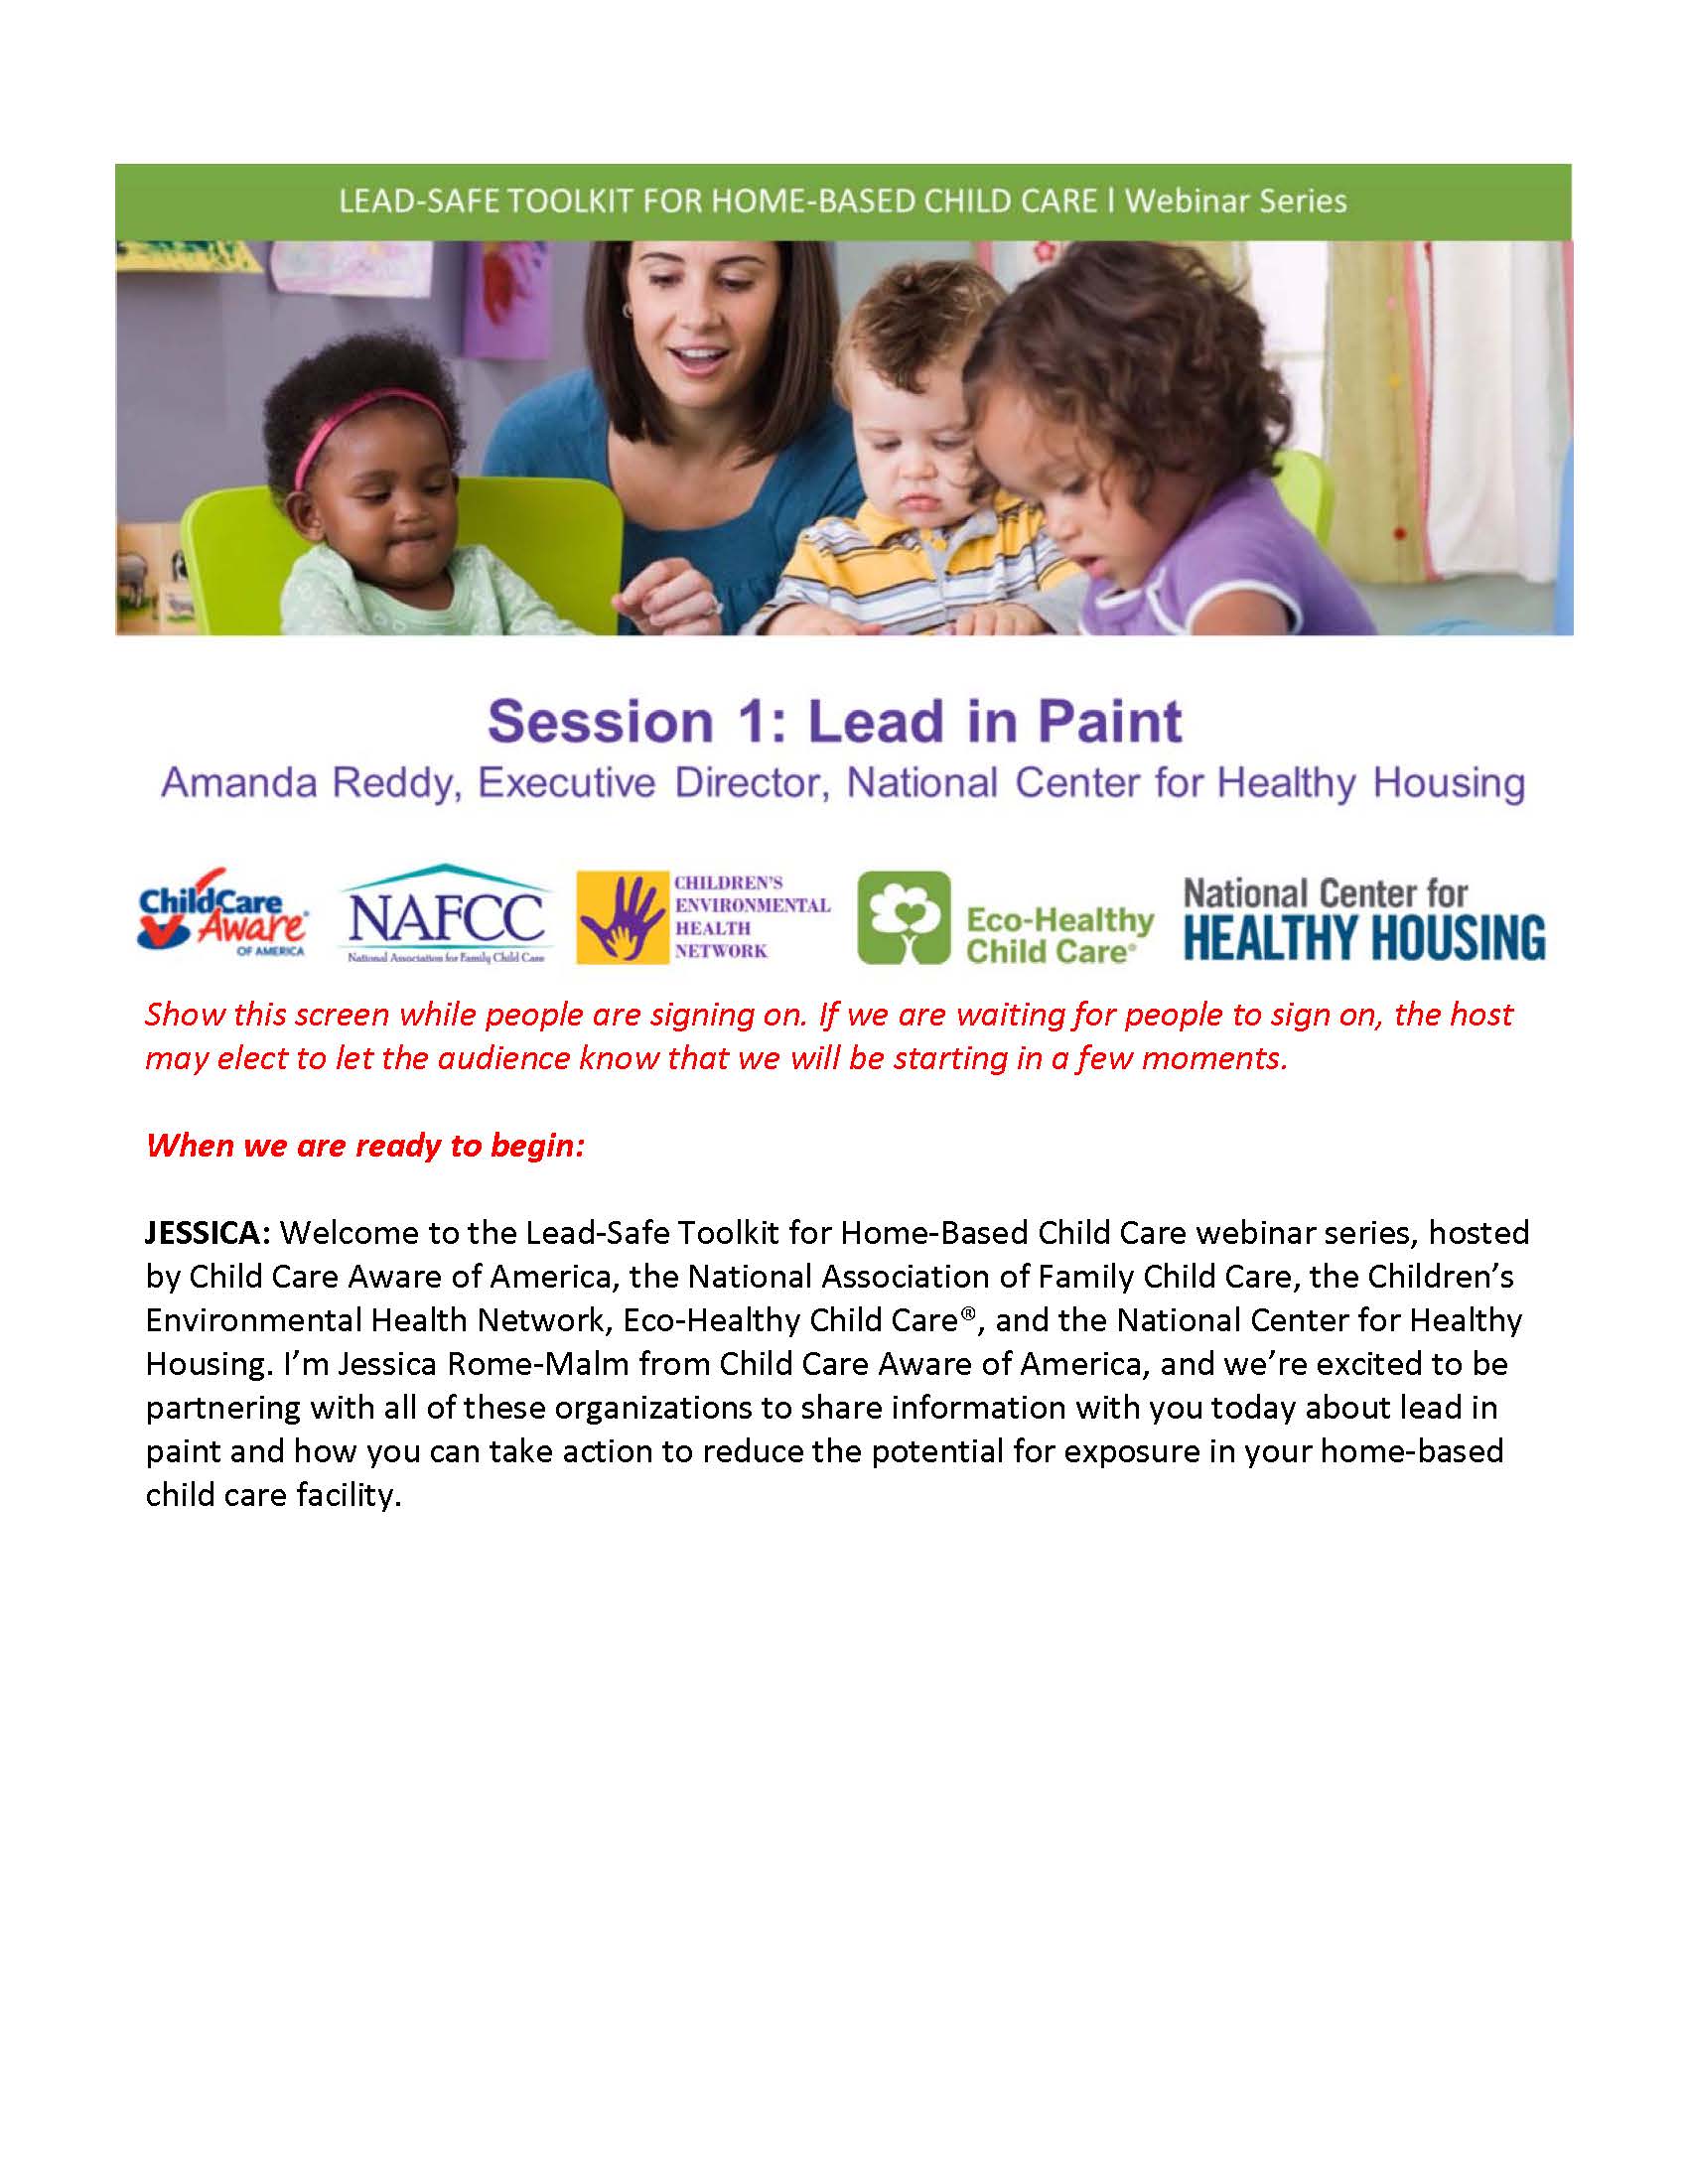 Lead-Safe Toolkit for Home-Based Child Care Webinar Series – Session 1: Lead in Paint [presentation text]